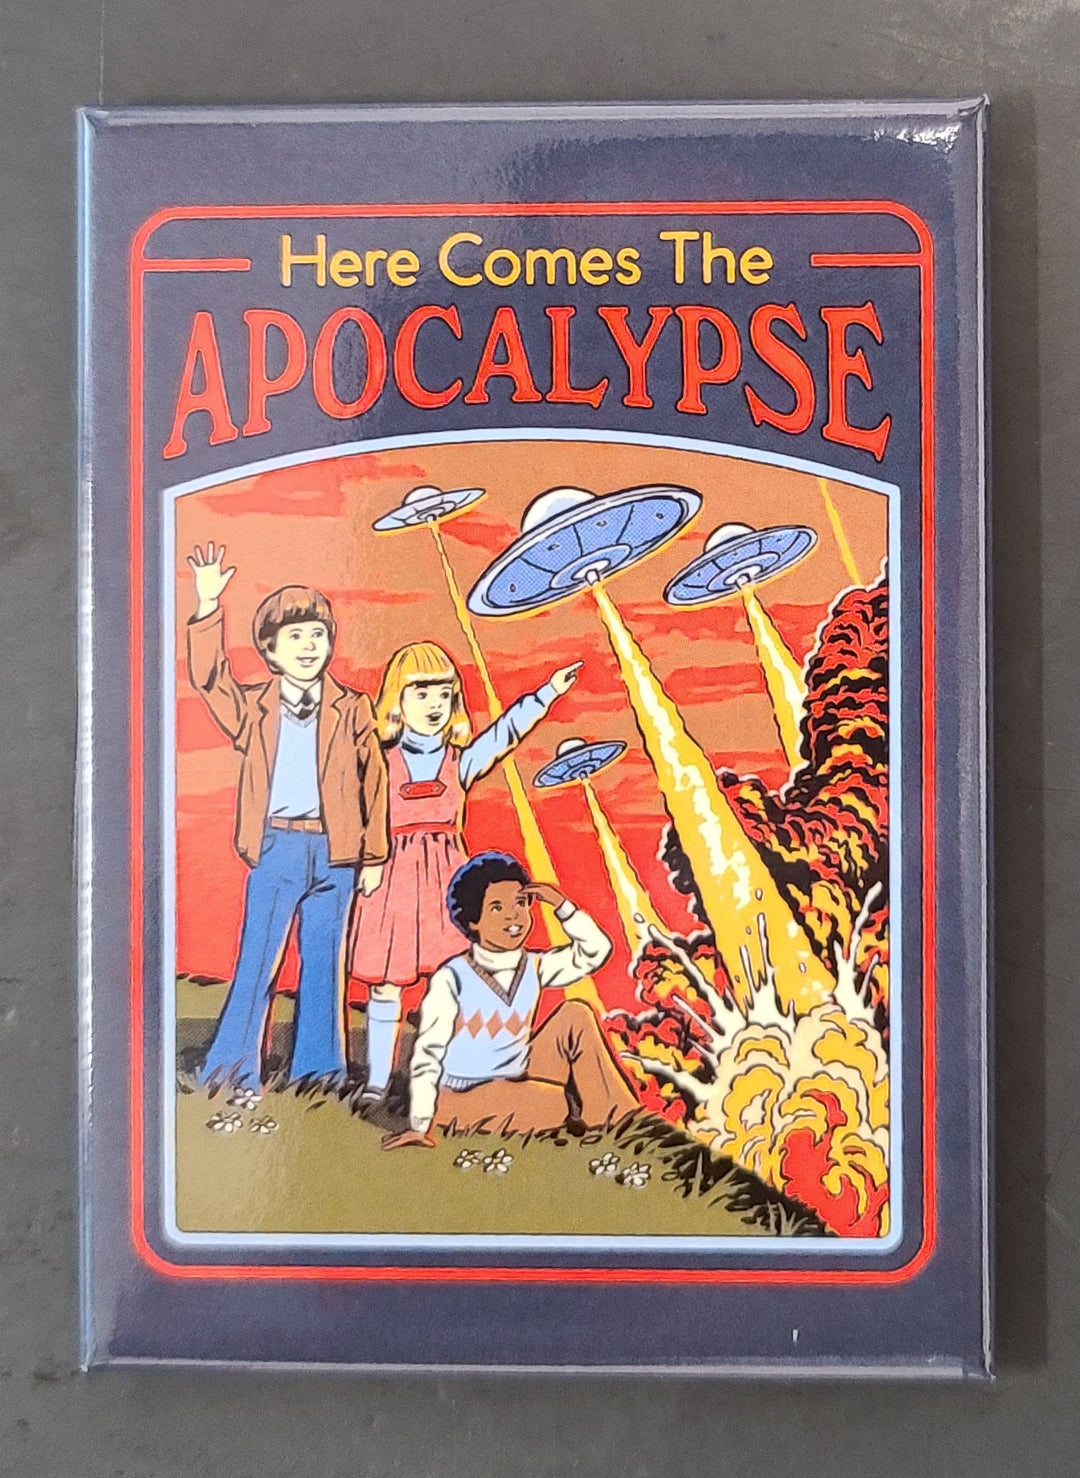 Here Comes the Apocalypse Magnet